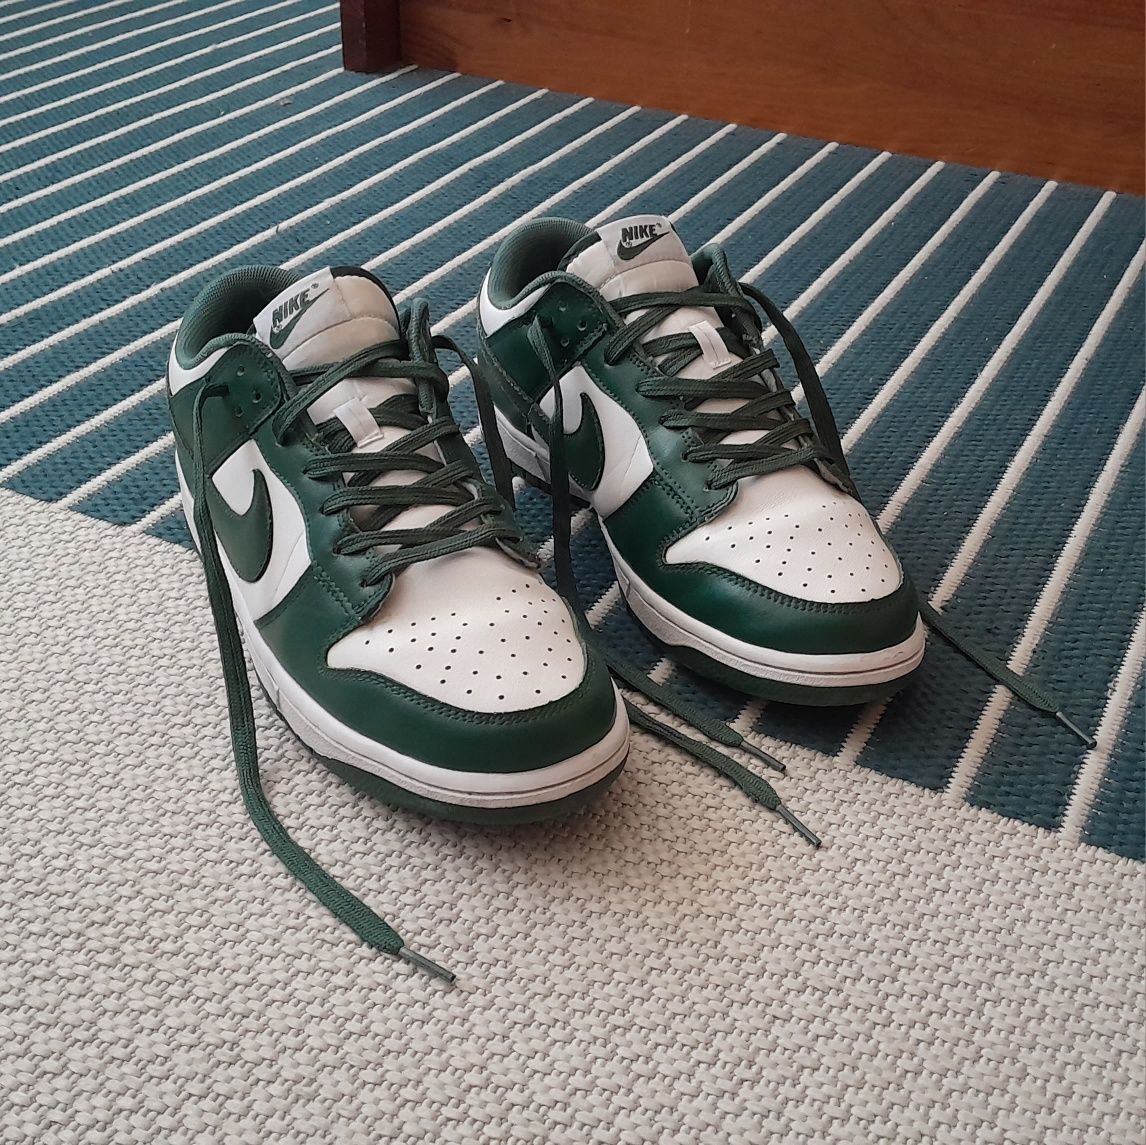 Nike Dunk Low "Team Green" Sneakers
Dunk Low "Team Green" sneakers
Dun